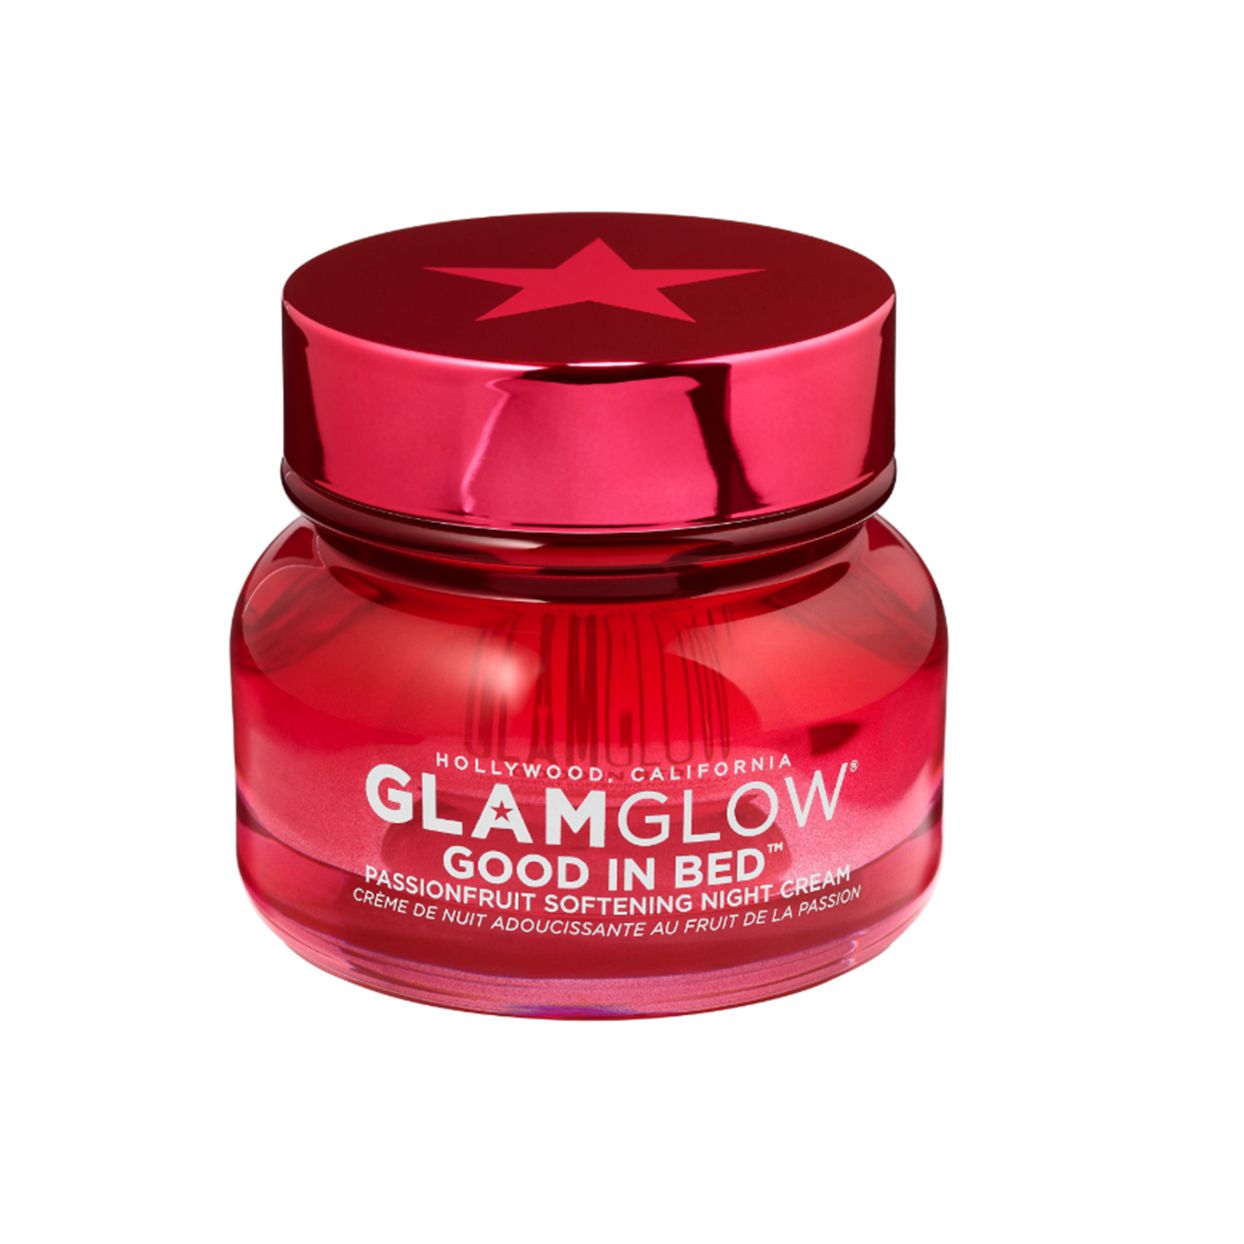 Glamglow Good in Bed